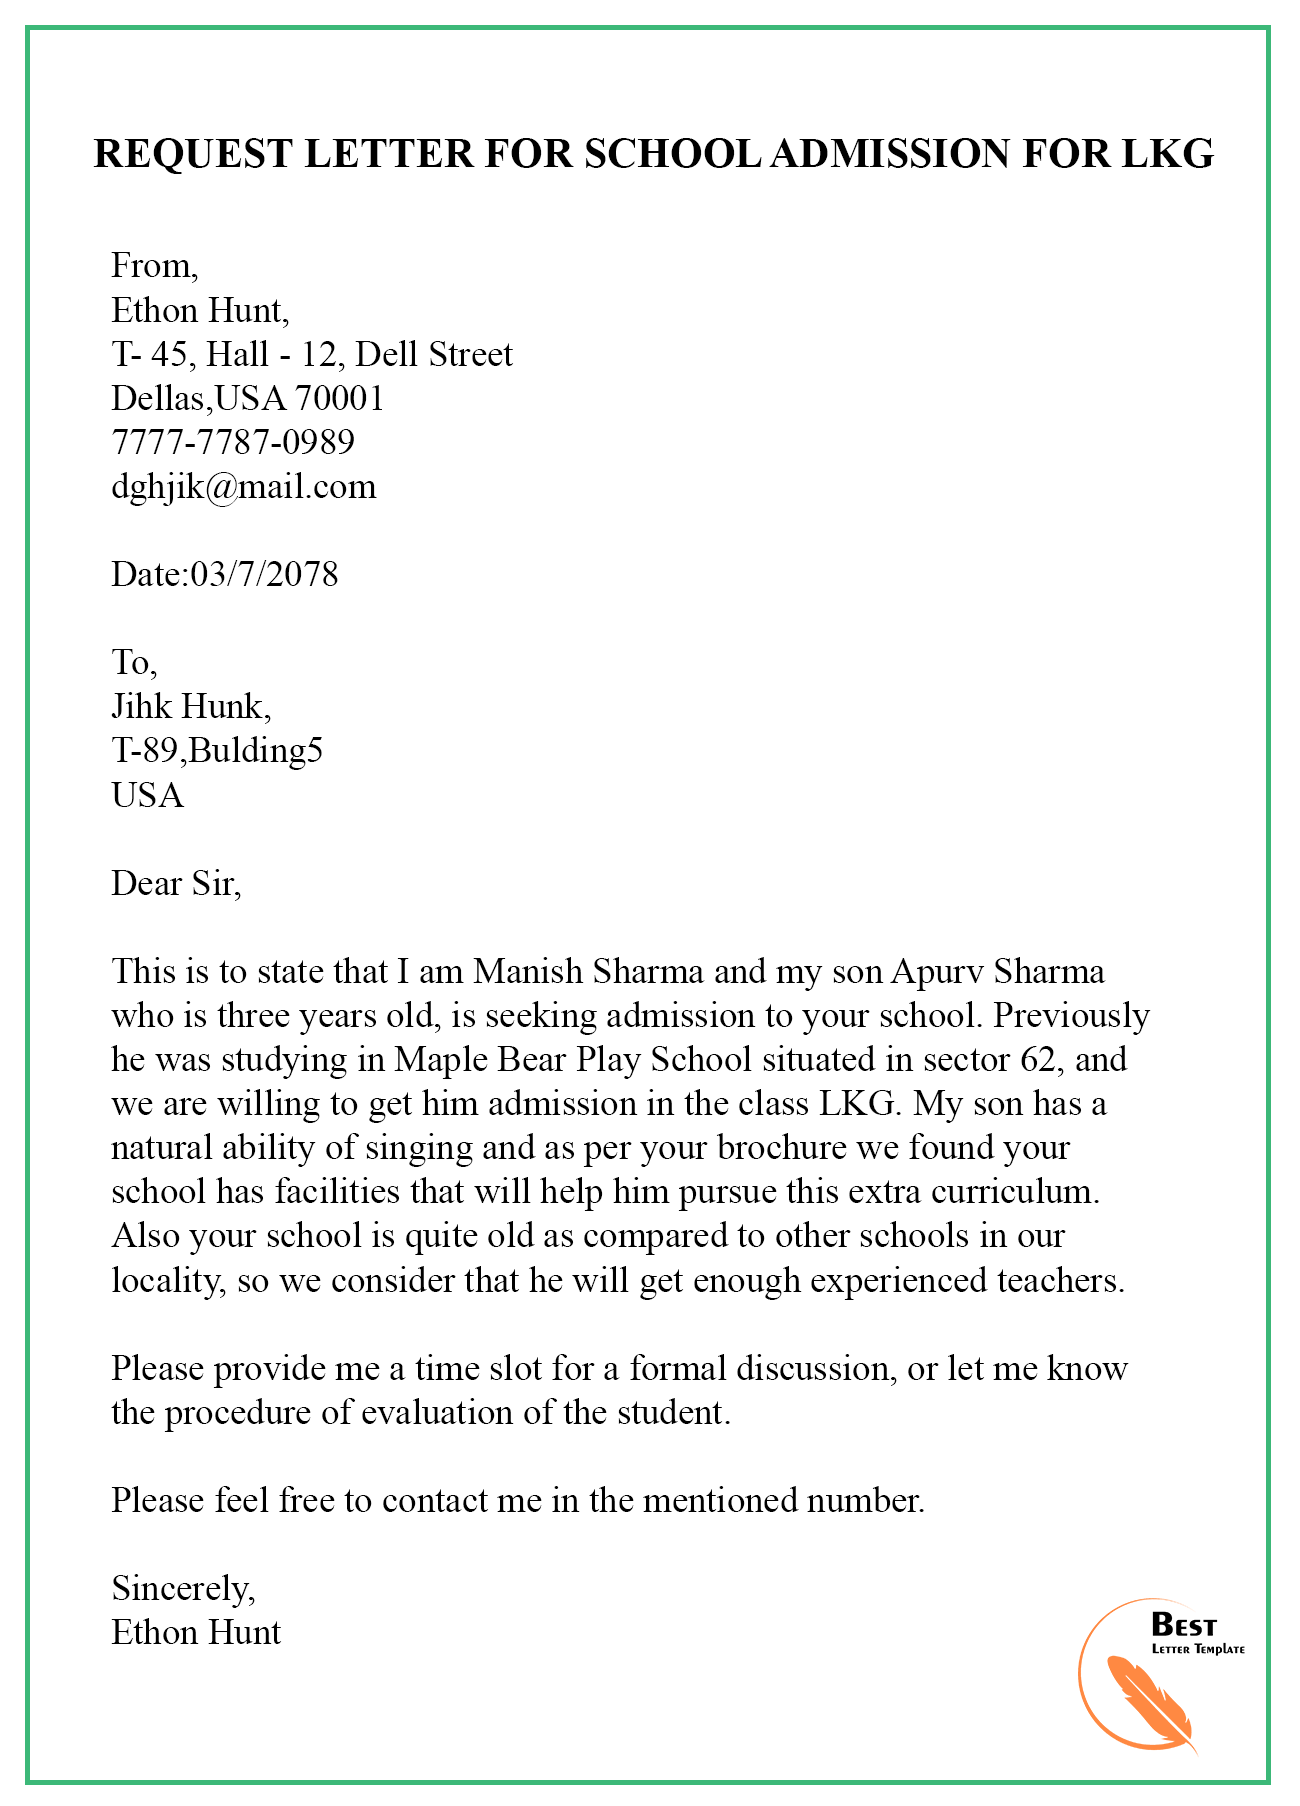 application letter for school event